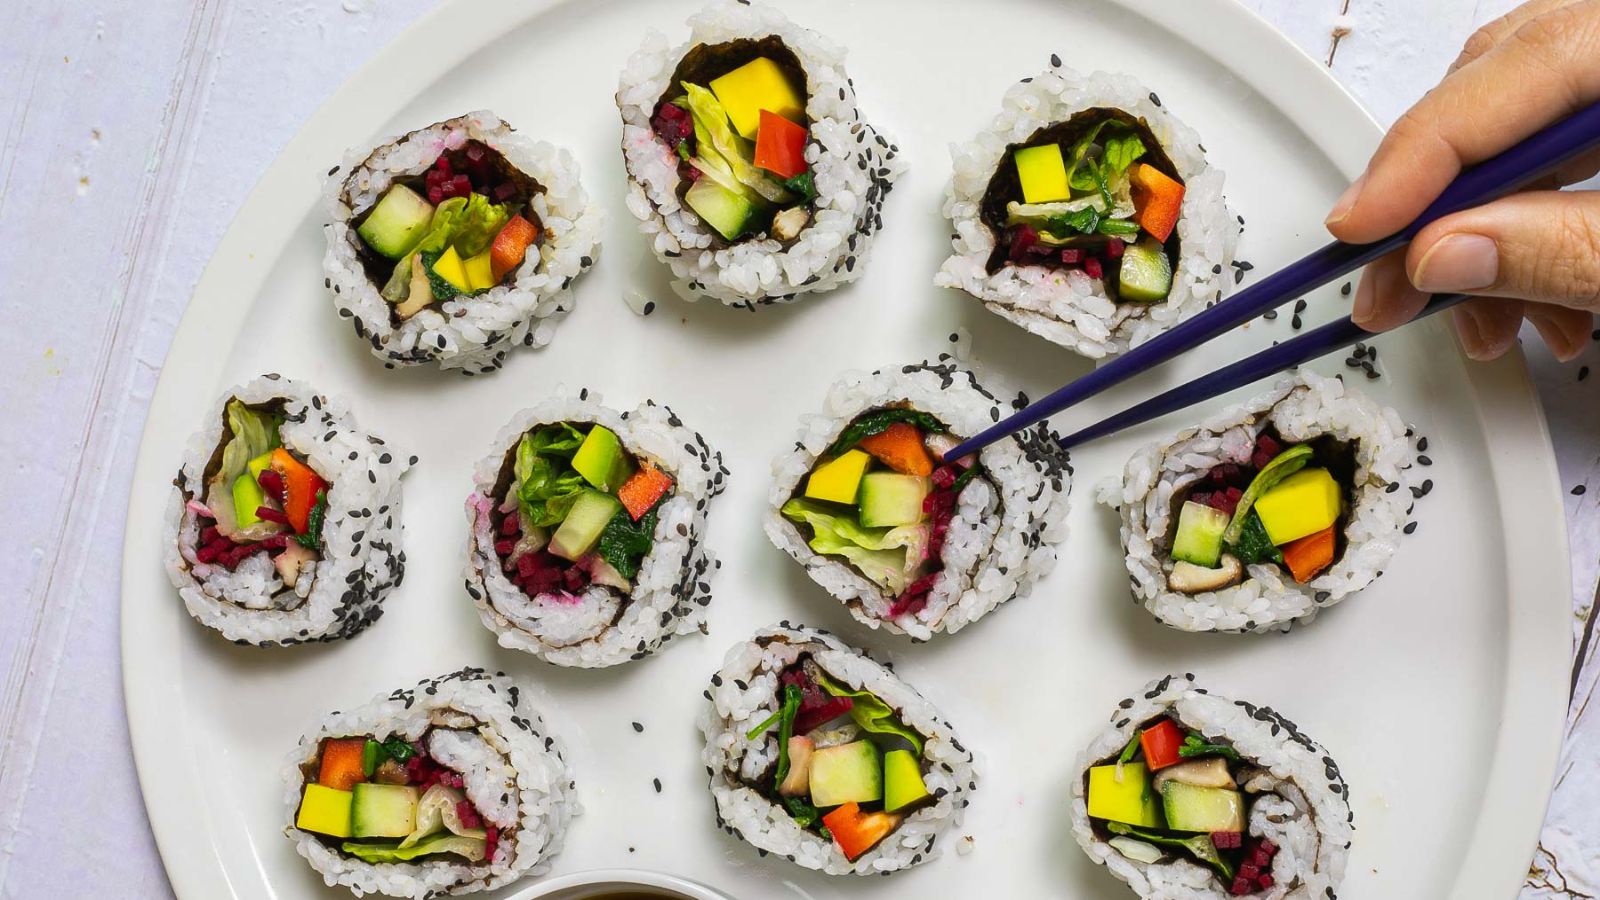 <p>If you thought sushi without fish or seafood was impossible, think again! Not only is it possible, but it is incredibly delicious. This easy sushi rolls recipe takes you step-by-step through how to prepare colorful and flavorful maki sushi in your own kitchen in just an hour!</p><p><strong>Recipe: <a href="https://mypureplants.com/sushi-without-fish/">sushi without fish</a></strong></p>